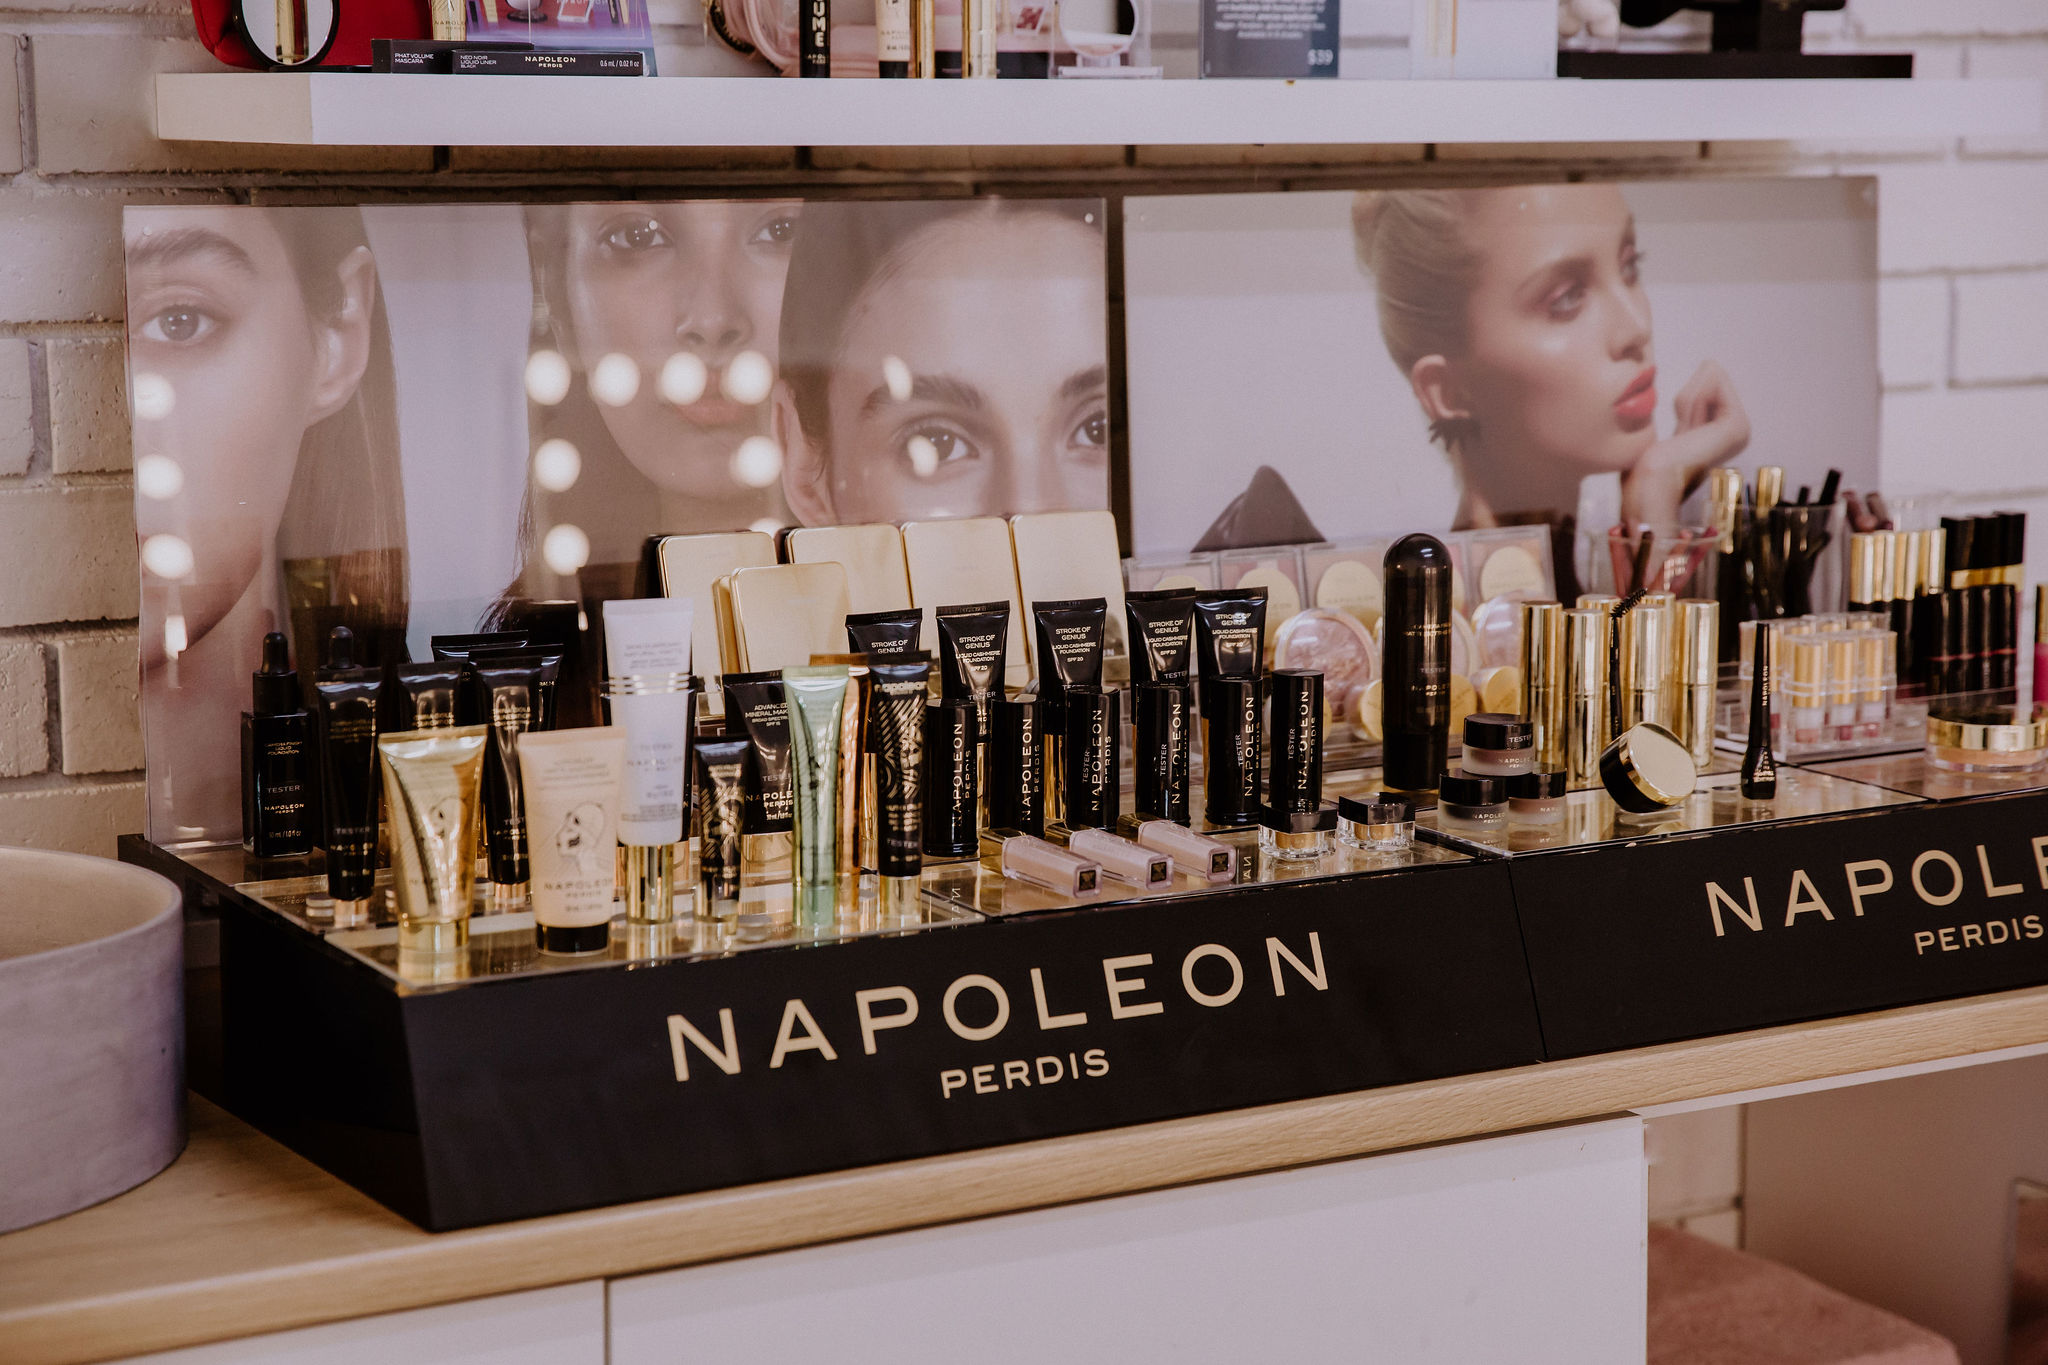 Napoleon Perdis Products and Makeup Accessories